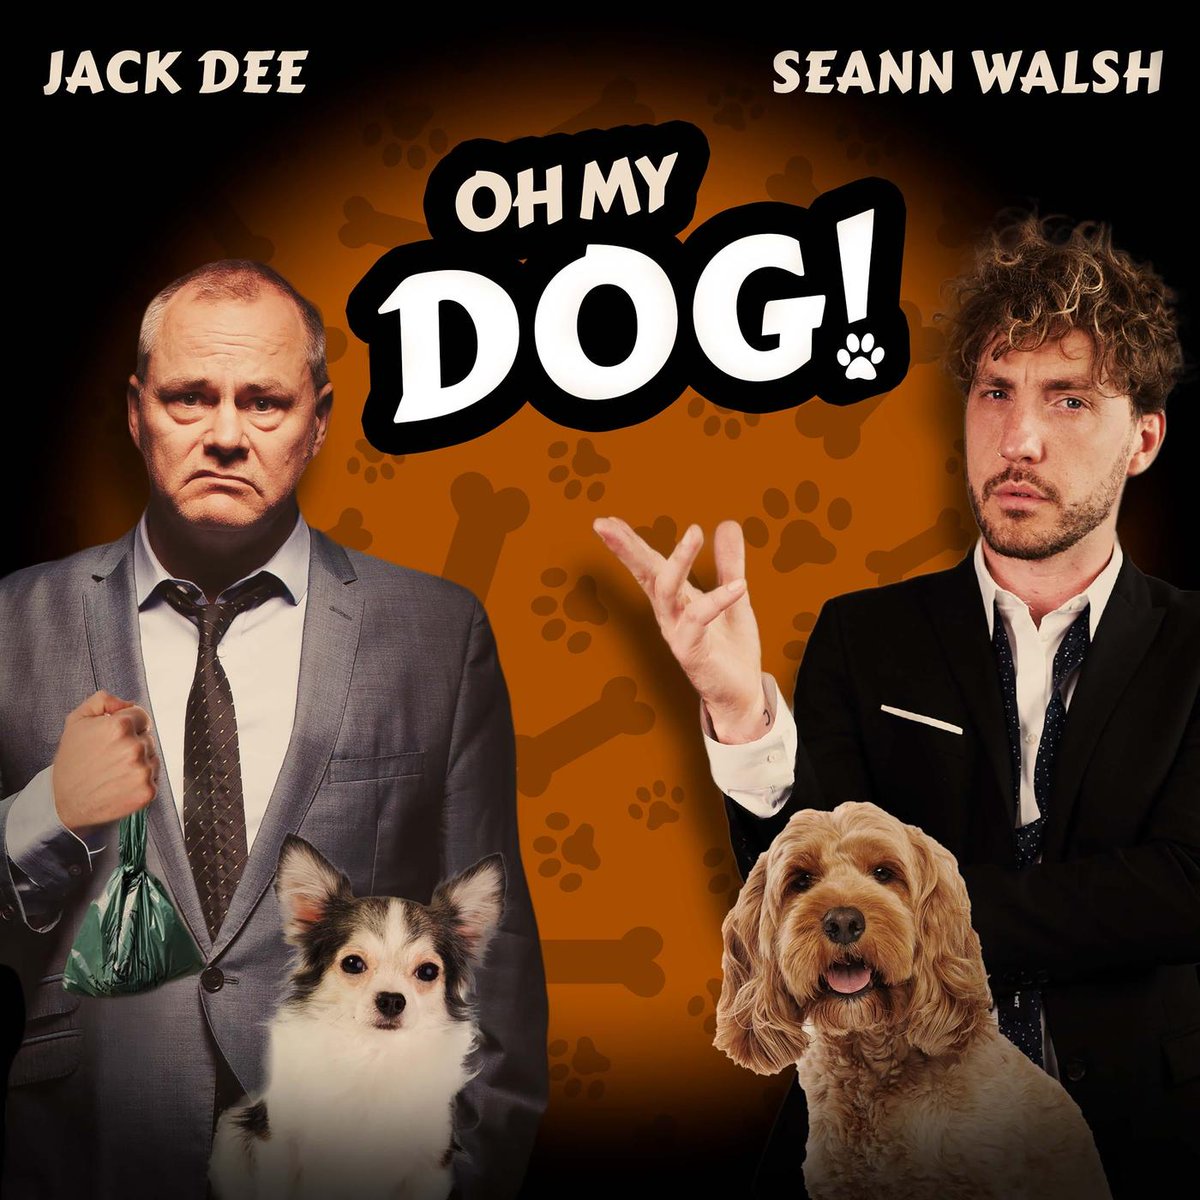 🐕 Calling all dog lovers! 🐩 A brand new episode of Oh My Dog is available now! This week @TheRealJackDee and @seannwalsh are joined by comedian Laura Smyth to chat all about their relationships with their beloved dogs. Listen here: t.ly/SQVmf